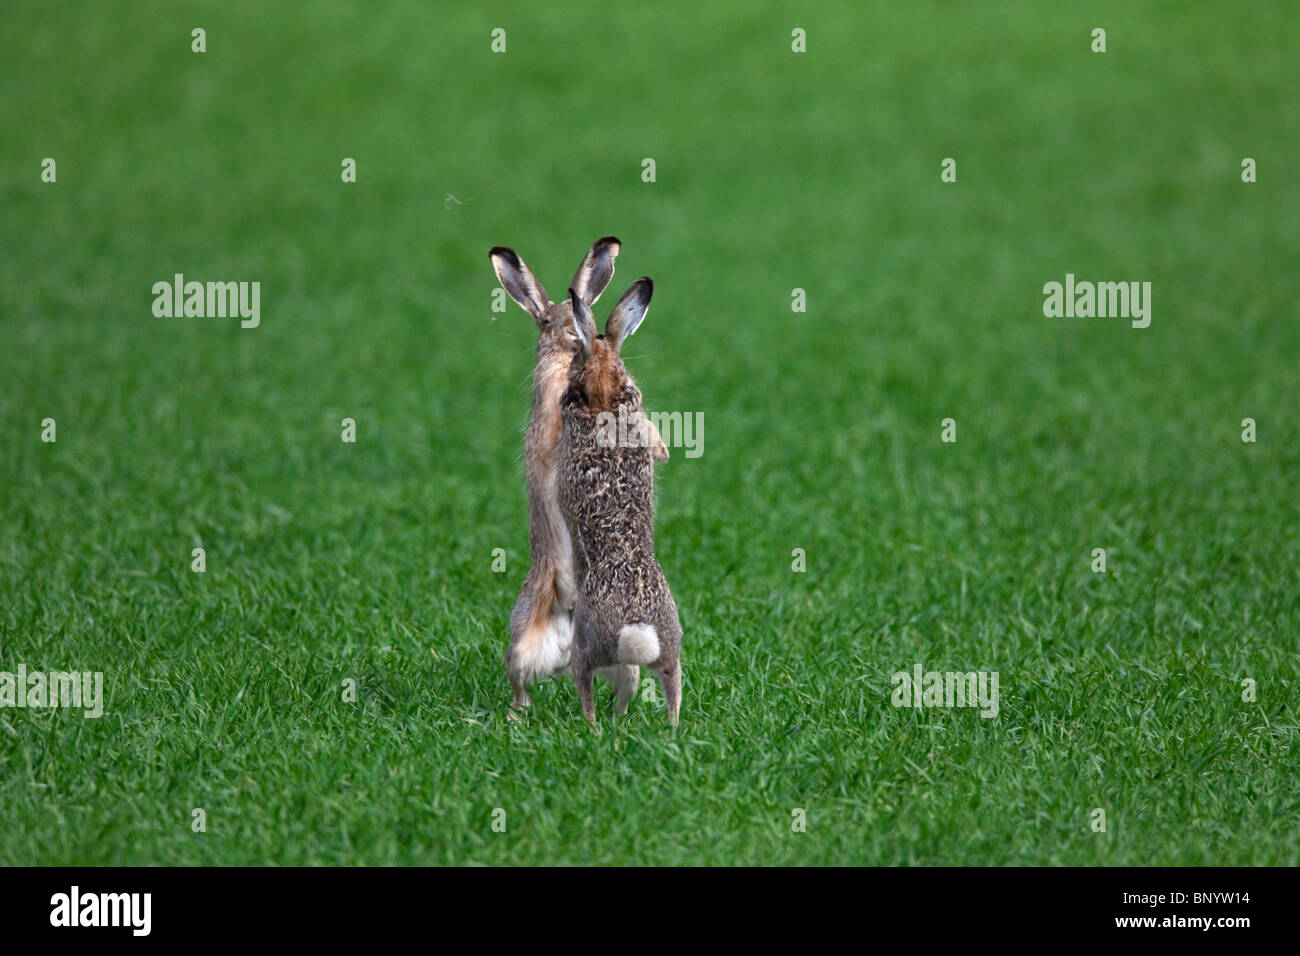 European Brown Hares (Lepus europaeus) boxing / fighting in field during the breeding season, Germany Stock Photo